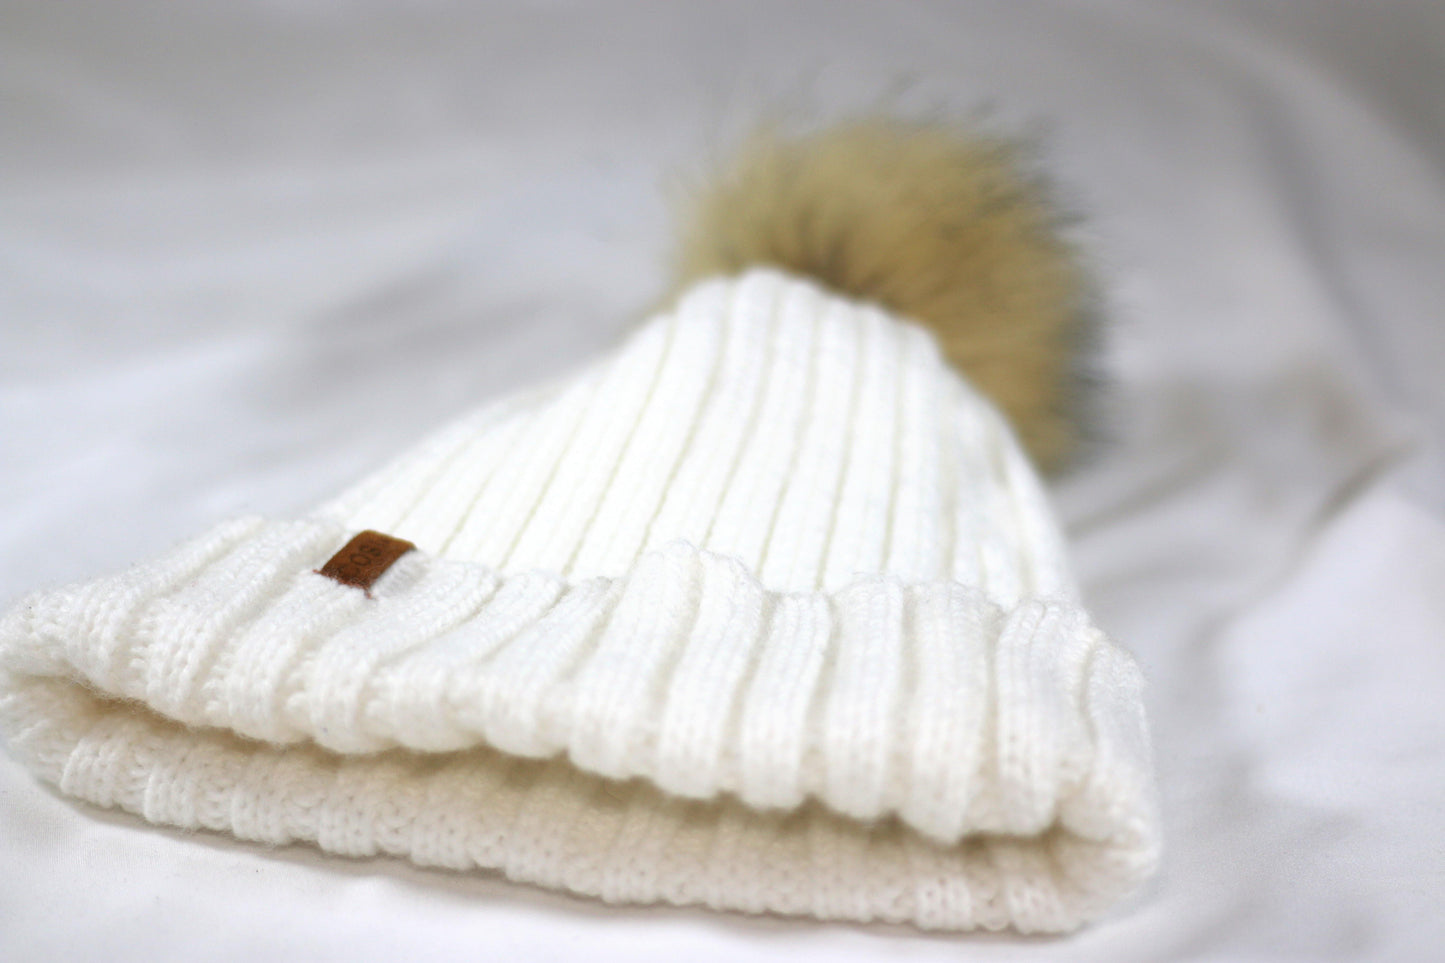 The Knit Pom in White - COSI & co.